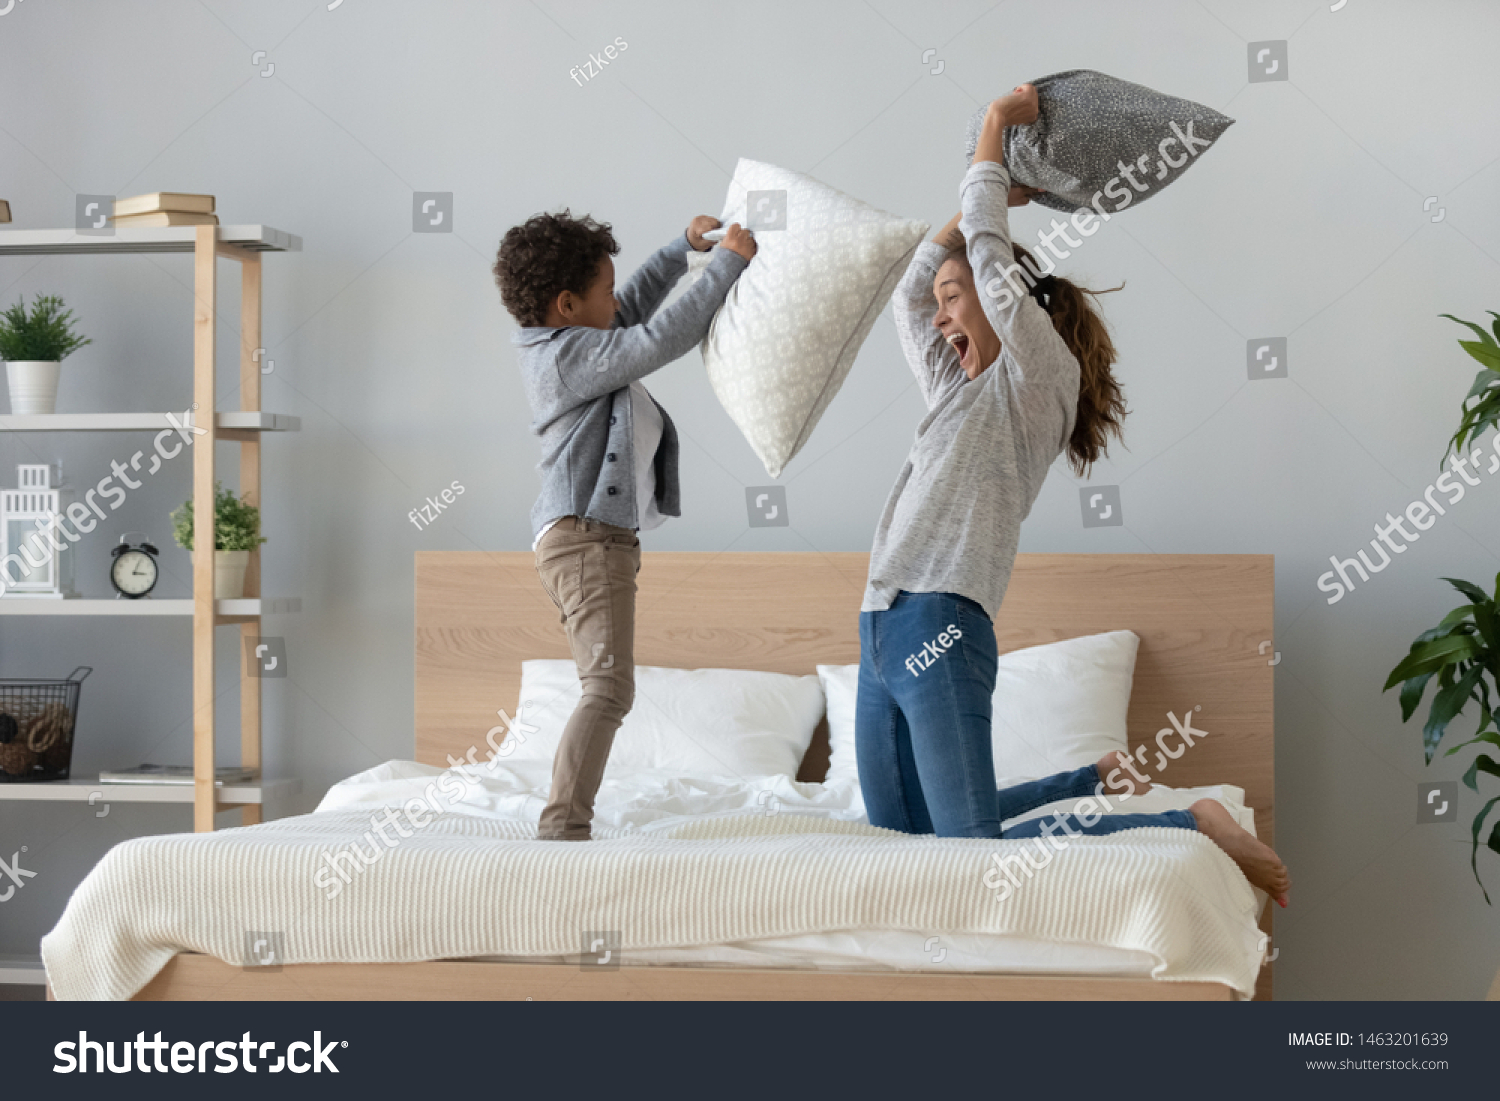 Funny happy african mixed race ethnicity family mum and little cute son having fun pillow fight on bed, young mother laughing playing funny game enjoy leisure activity with small child boy in bedroom #1463201639